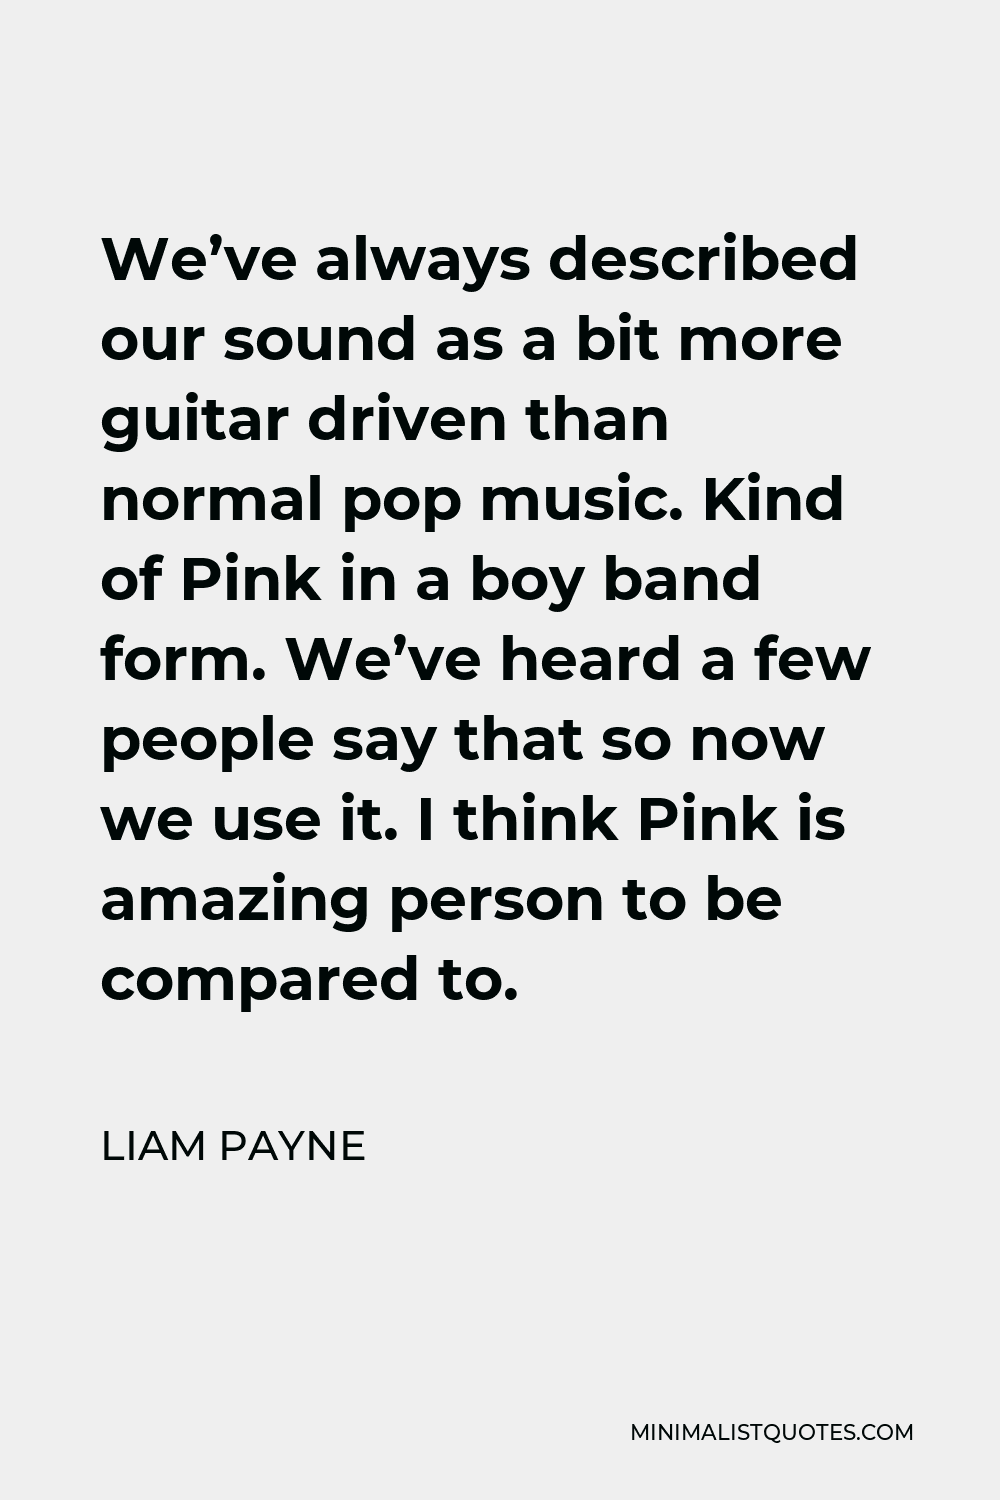 Liam Payne Quote - We’ve always described our sound as a bit more guitar driven than normal pop music. Kind of Pink in a boy band form. We’ve heard a few people say that so now we use it. I think Pink is amazing person to be compared to.